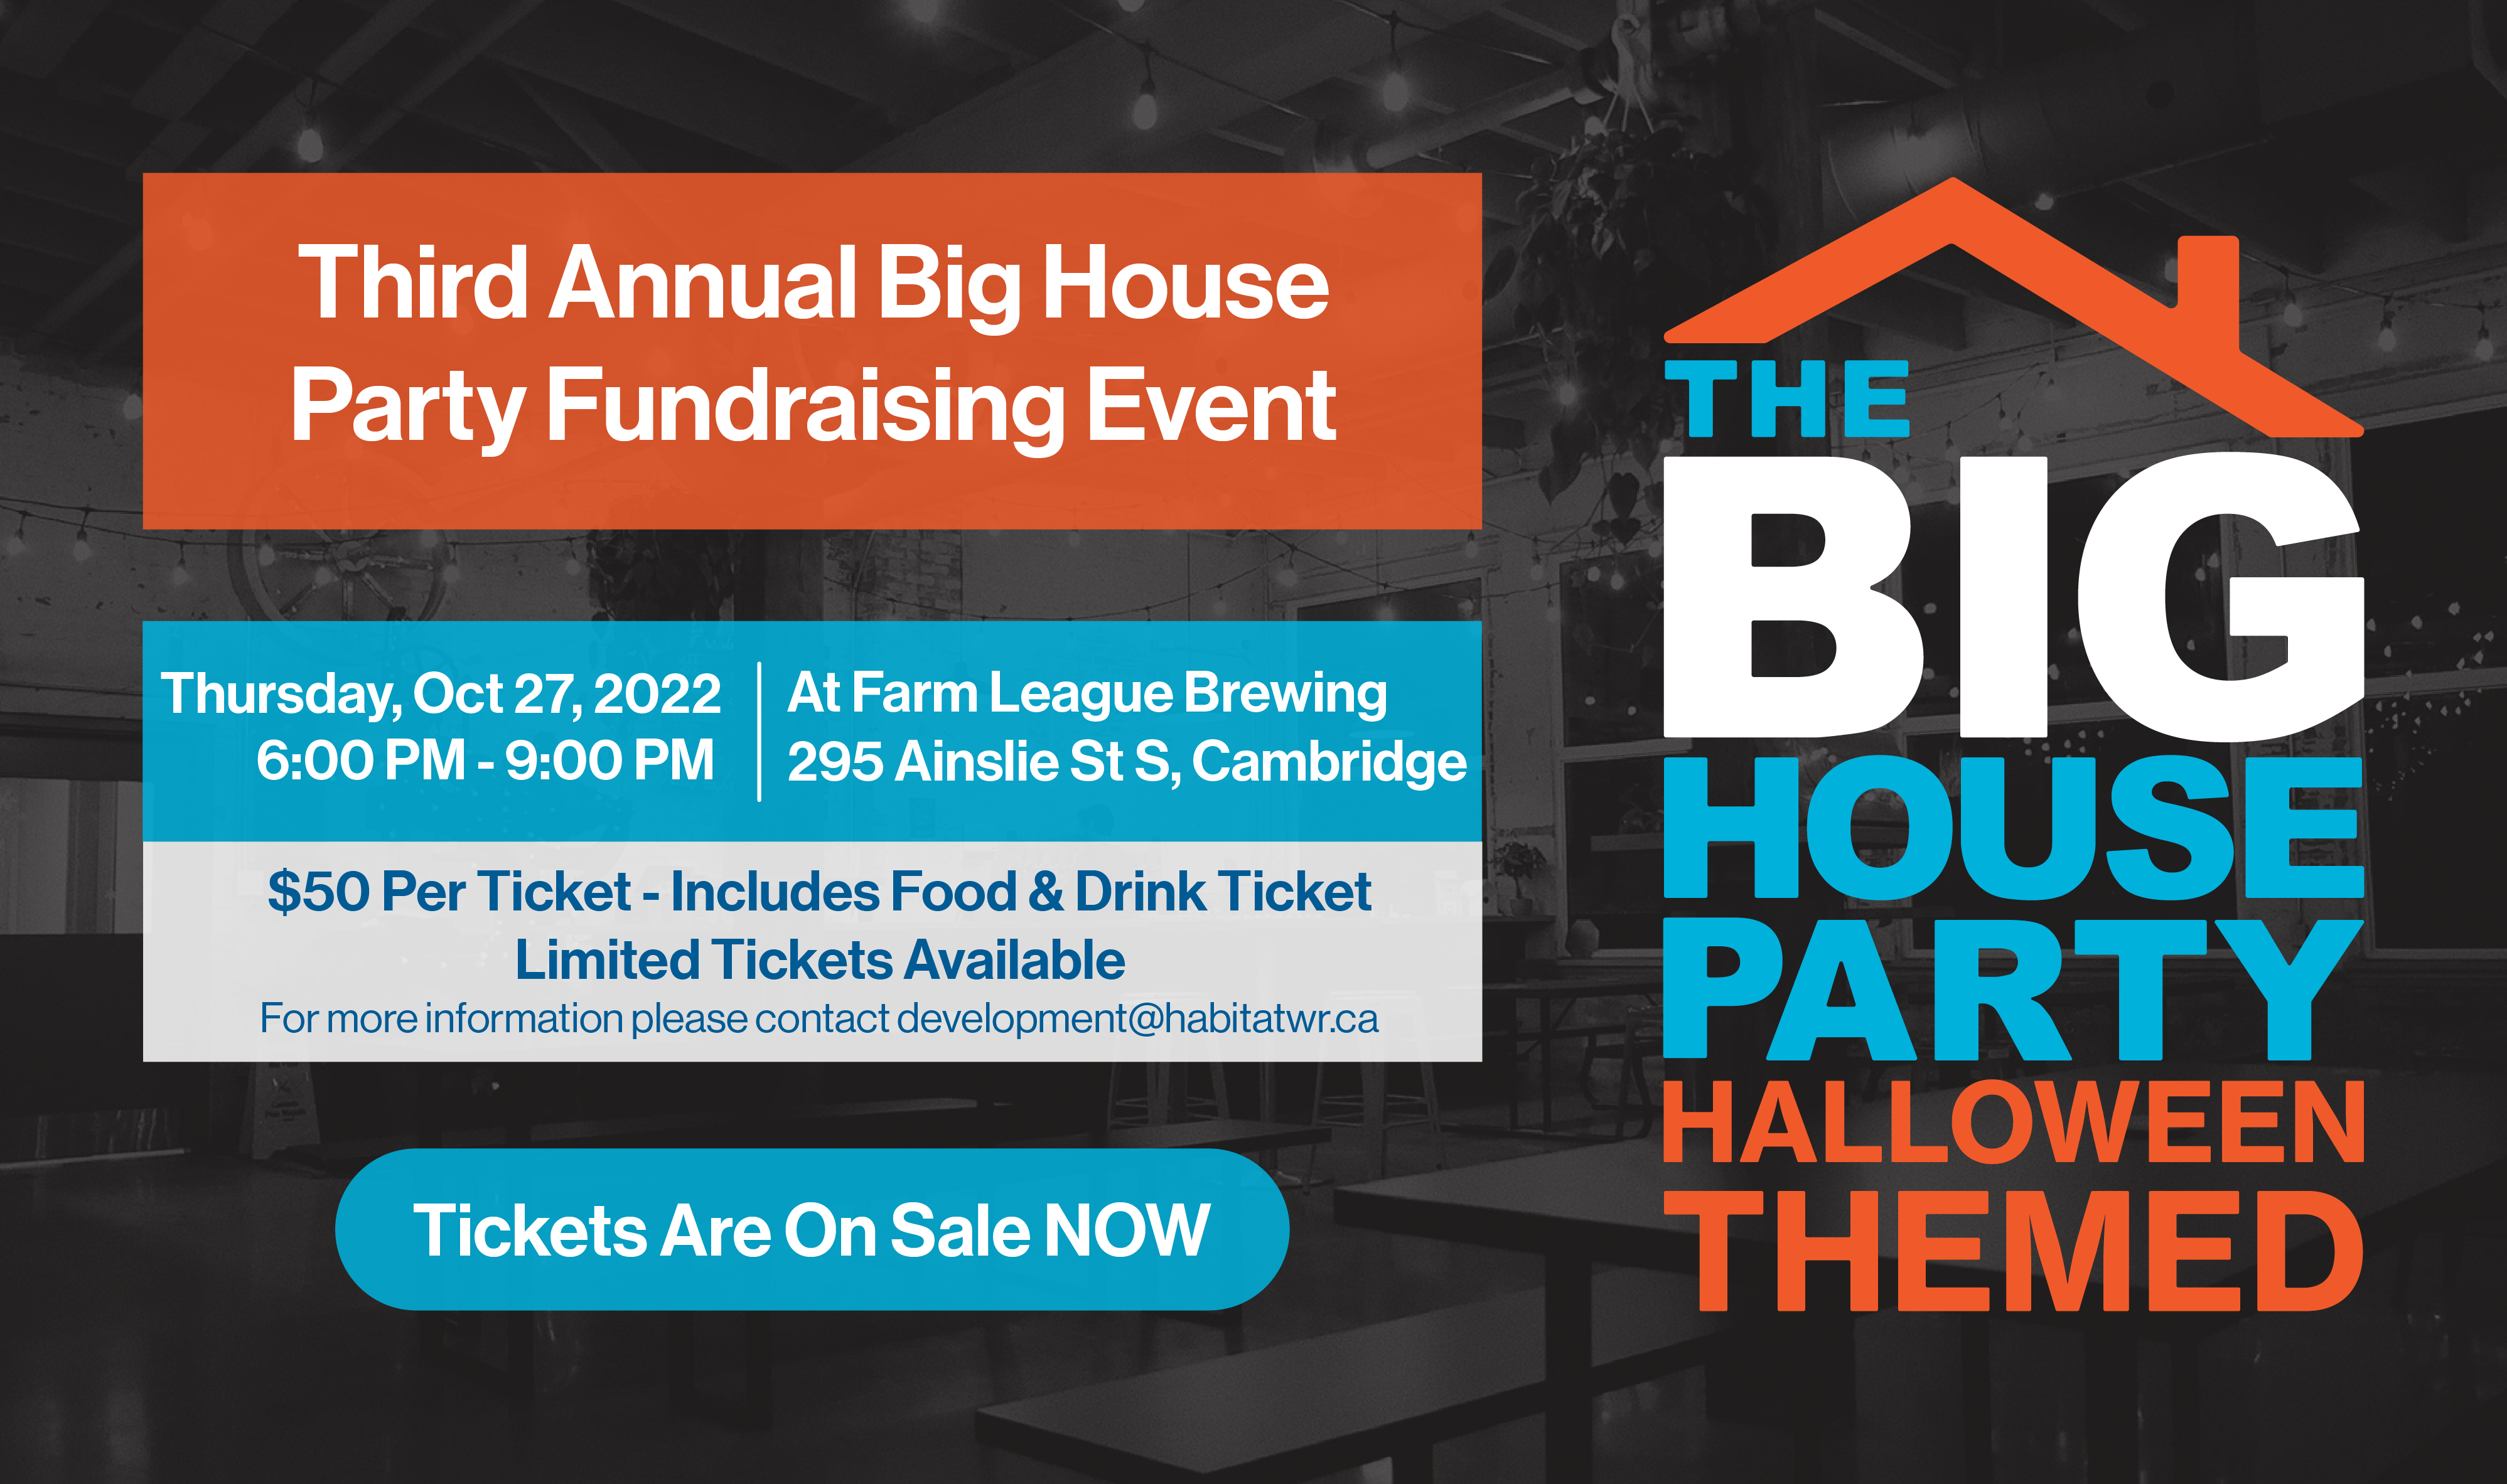 Big House Party Halloween Themed: Third Annual Big House Party Fundraising Event. October 27, 2022 6-9 PM. At Farm League Brewing. $50 Per Ticket